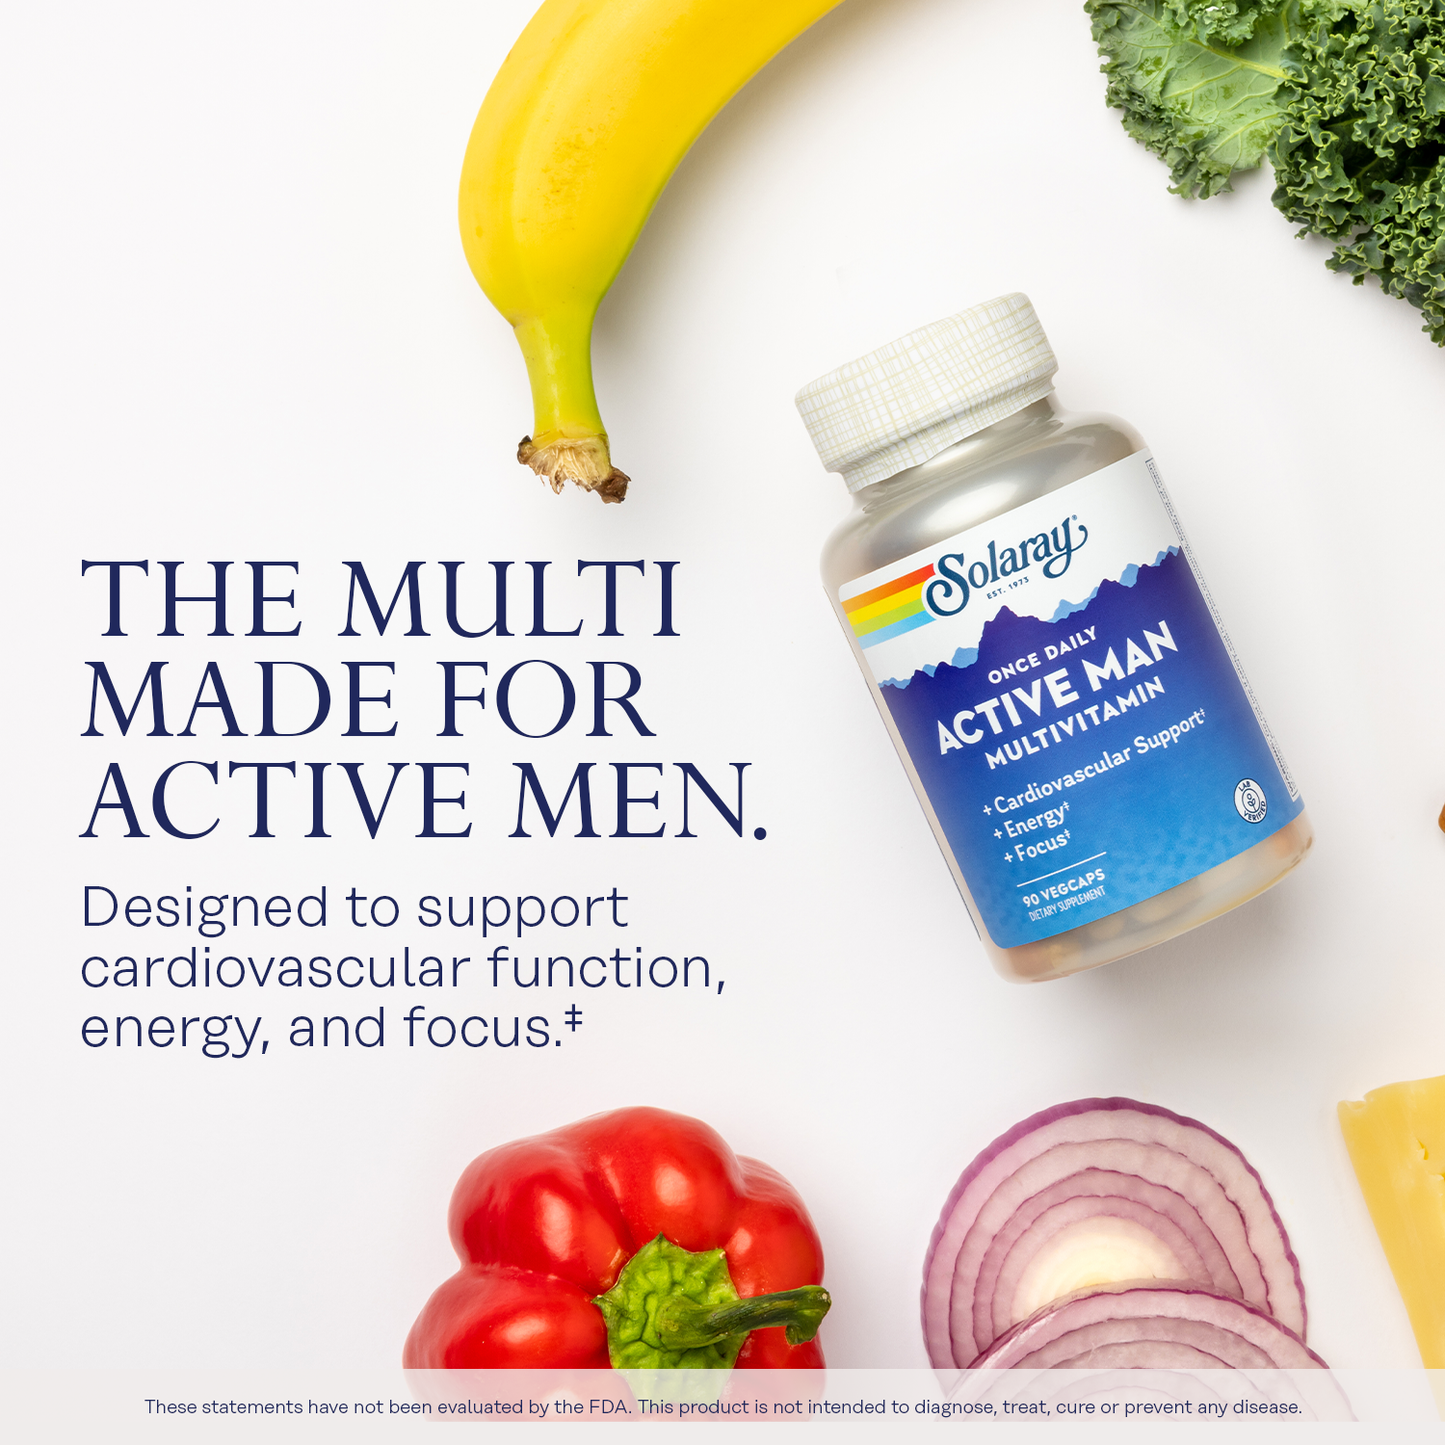 Solaray Once Daily Active Man Multivitamin & Mineral, Multivitamin for Cardiovascular, Support, Energy & Focus, Digestive Enzyme Blend, Amino Acids and Whole Food Base, 90 Servings, 90 VegCaps